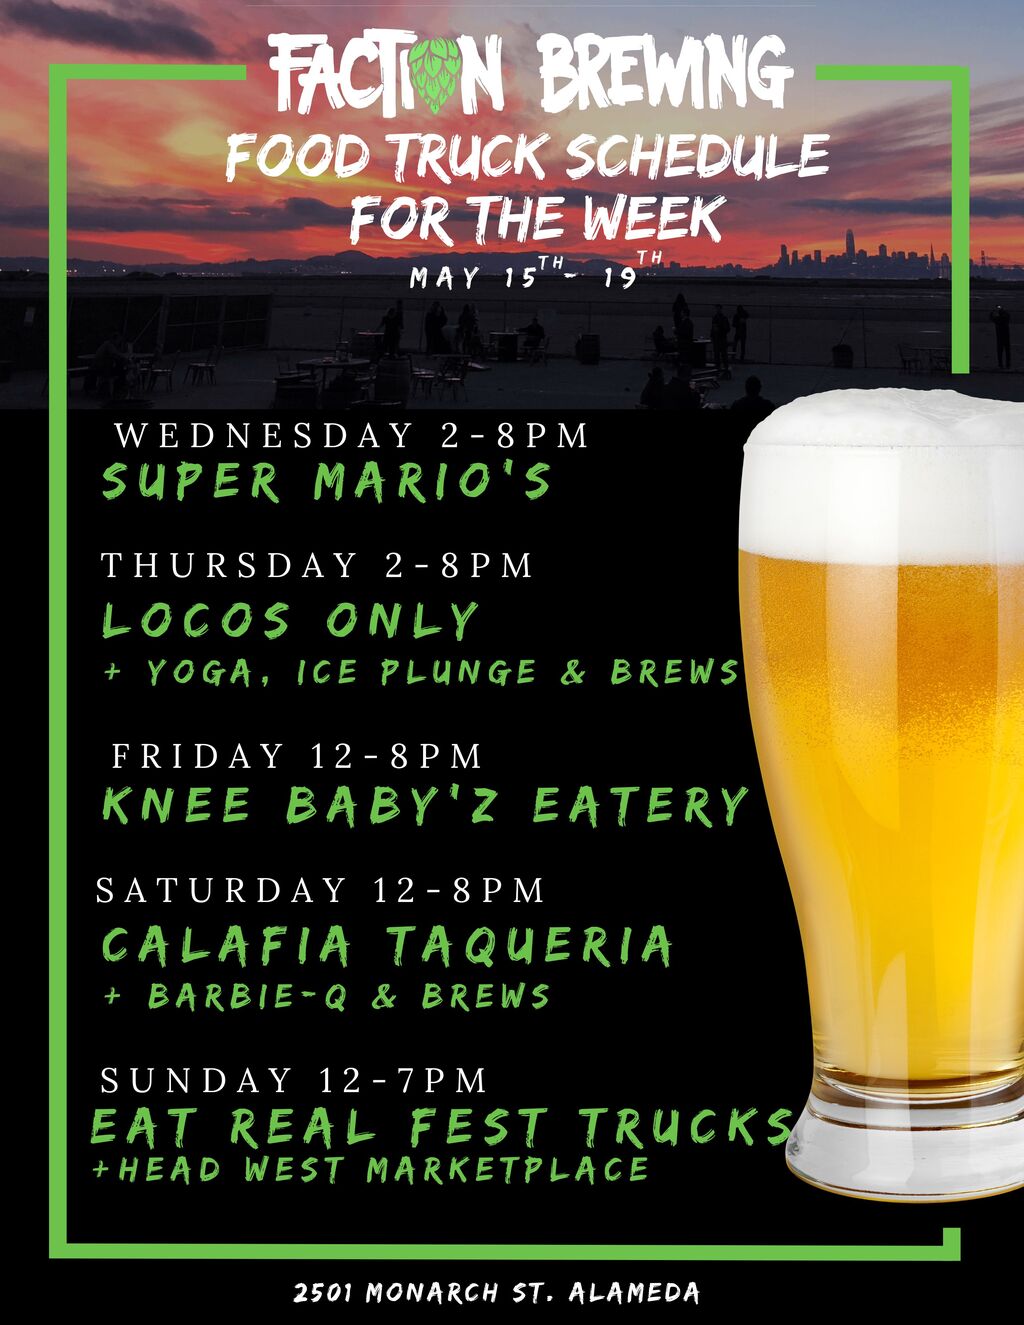 Faction Brewing FOOD TRUCK SCHEDULE FOR THE WEEK OF MAY 15TH 19TH promotion flier on Digifli com